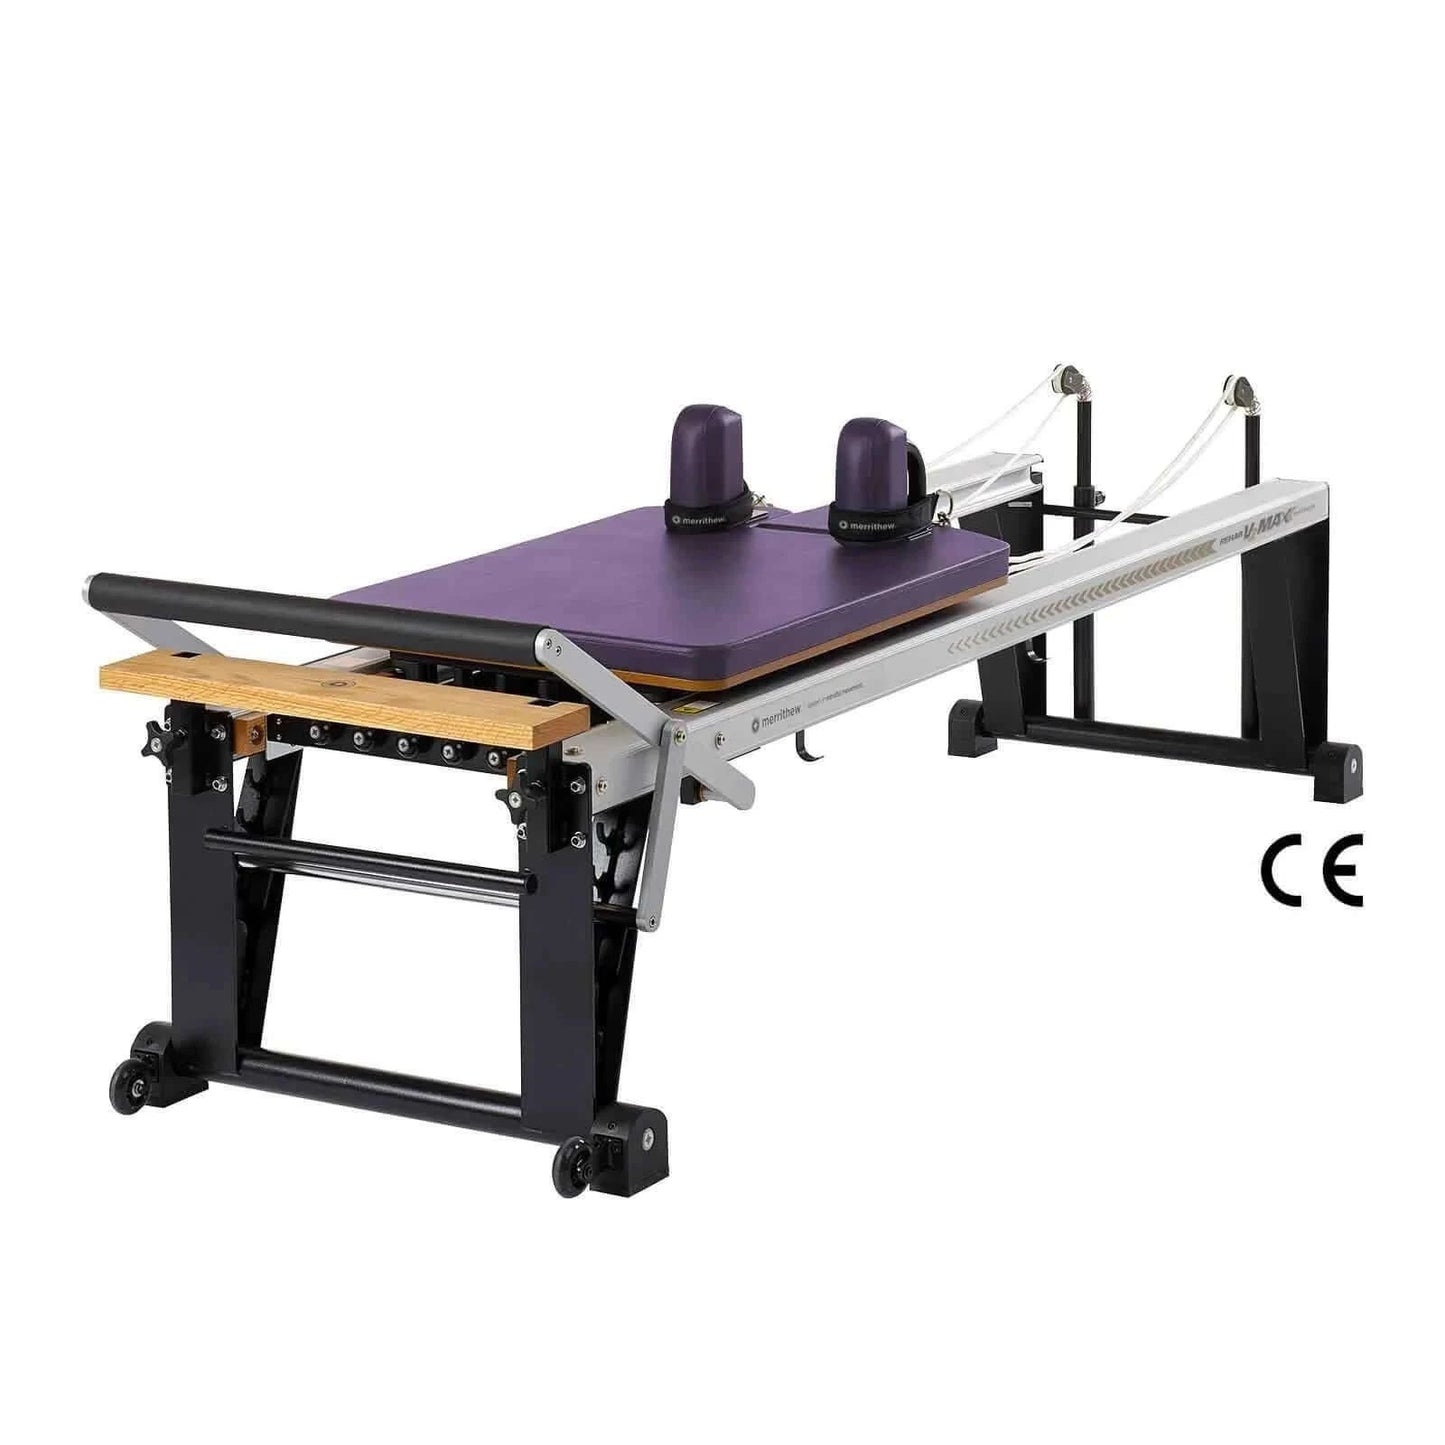 Purple Impulse Merrithew™ Pilates Rehab V2 Max™ Reformer Machine by Merrithew™ sold by Pilates Matters® by BSP LLC